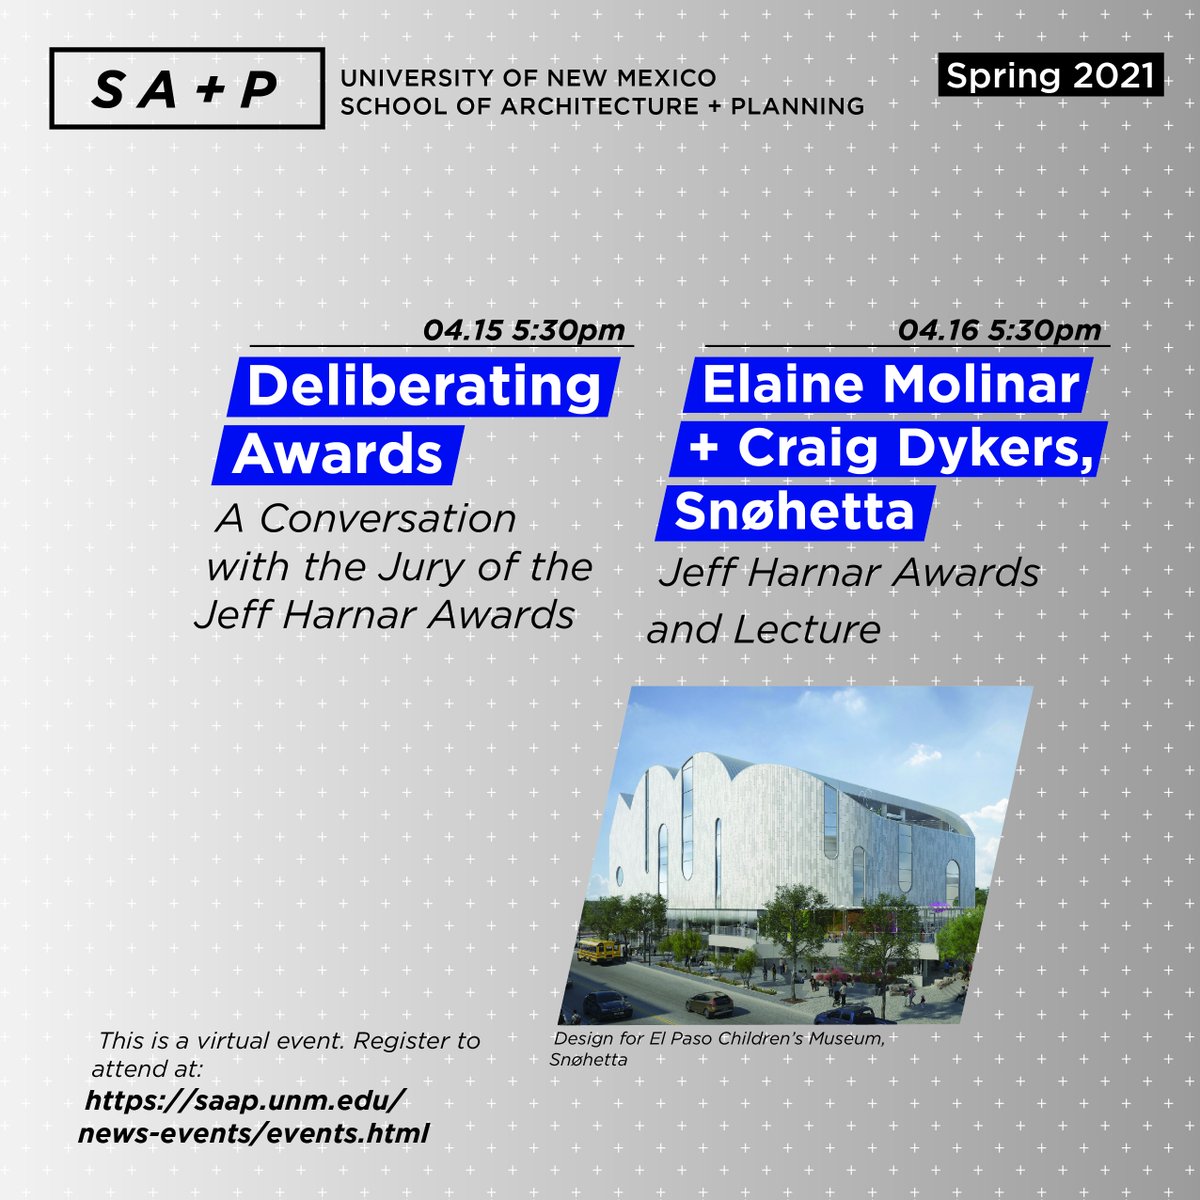 On April 15+16, SA+P will celebrate the Jeff Harnar Awards with a series of events. Join us on 4/15 for a roundtable with the jury. Awards will be presented 4/16 along with a lecture by Snøhetta partners Elaine Molinar and Craig Dykers. Register at: saap.unm.edu/news-events/ev…